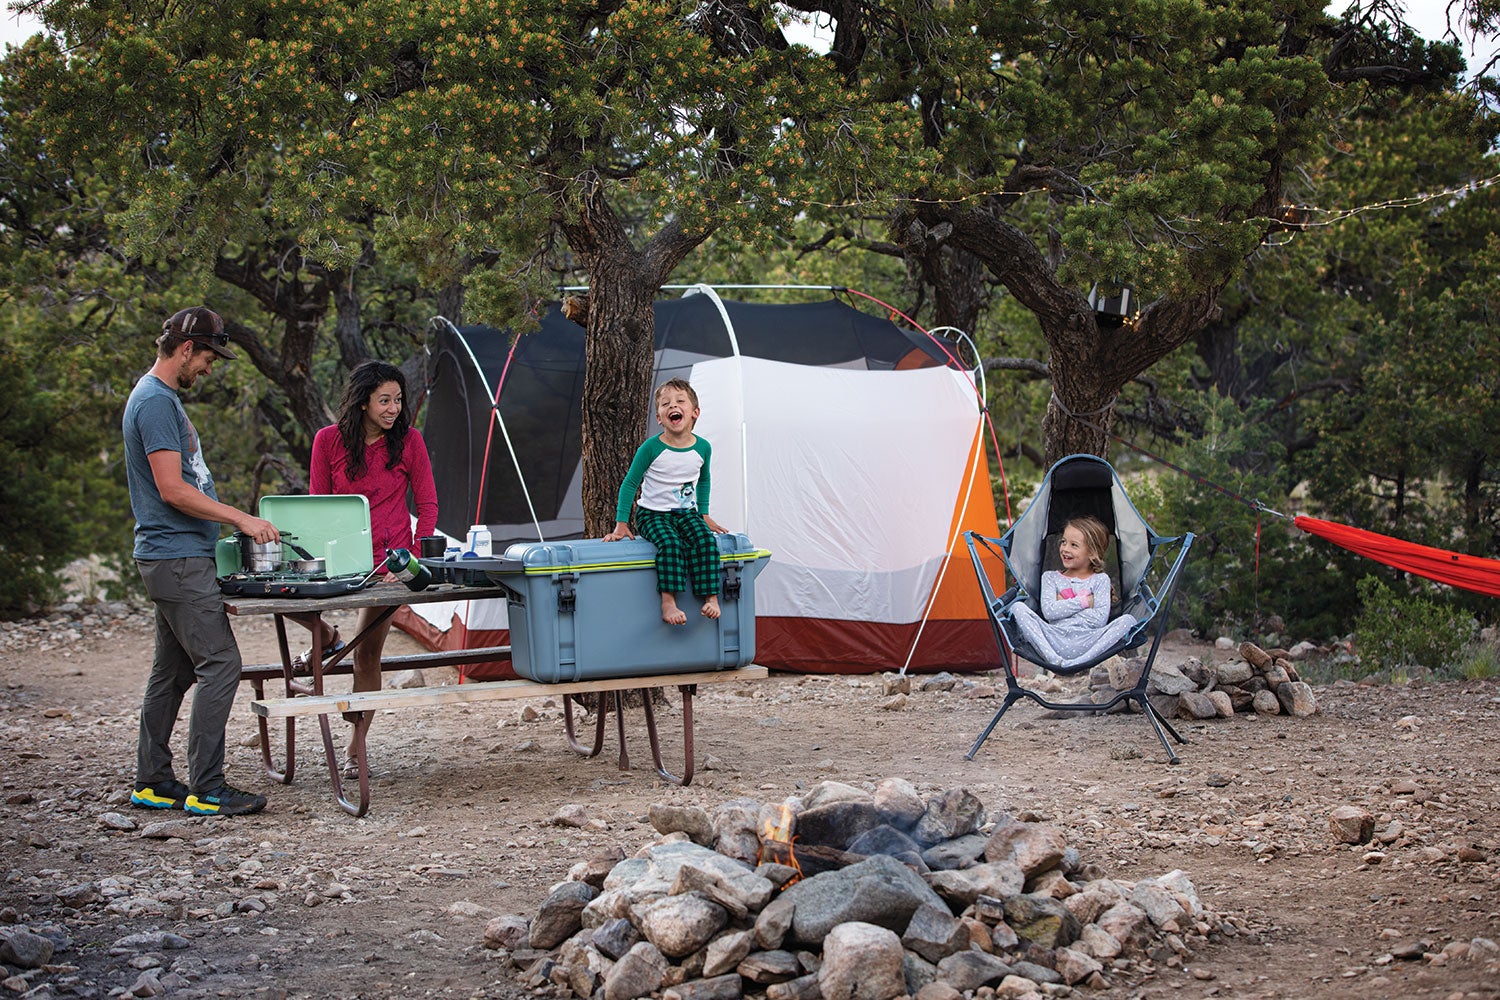 Best camping gear for kids that real families recommend